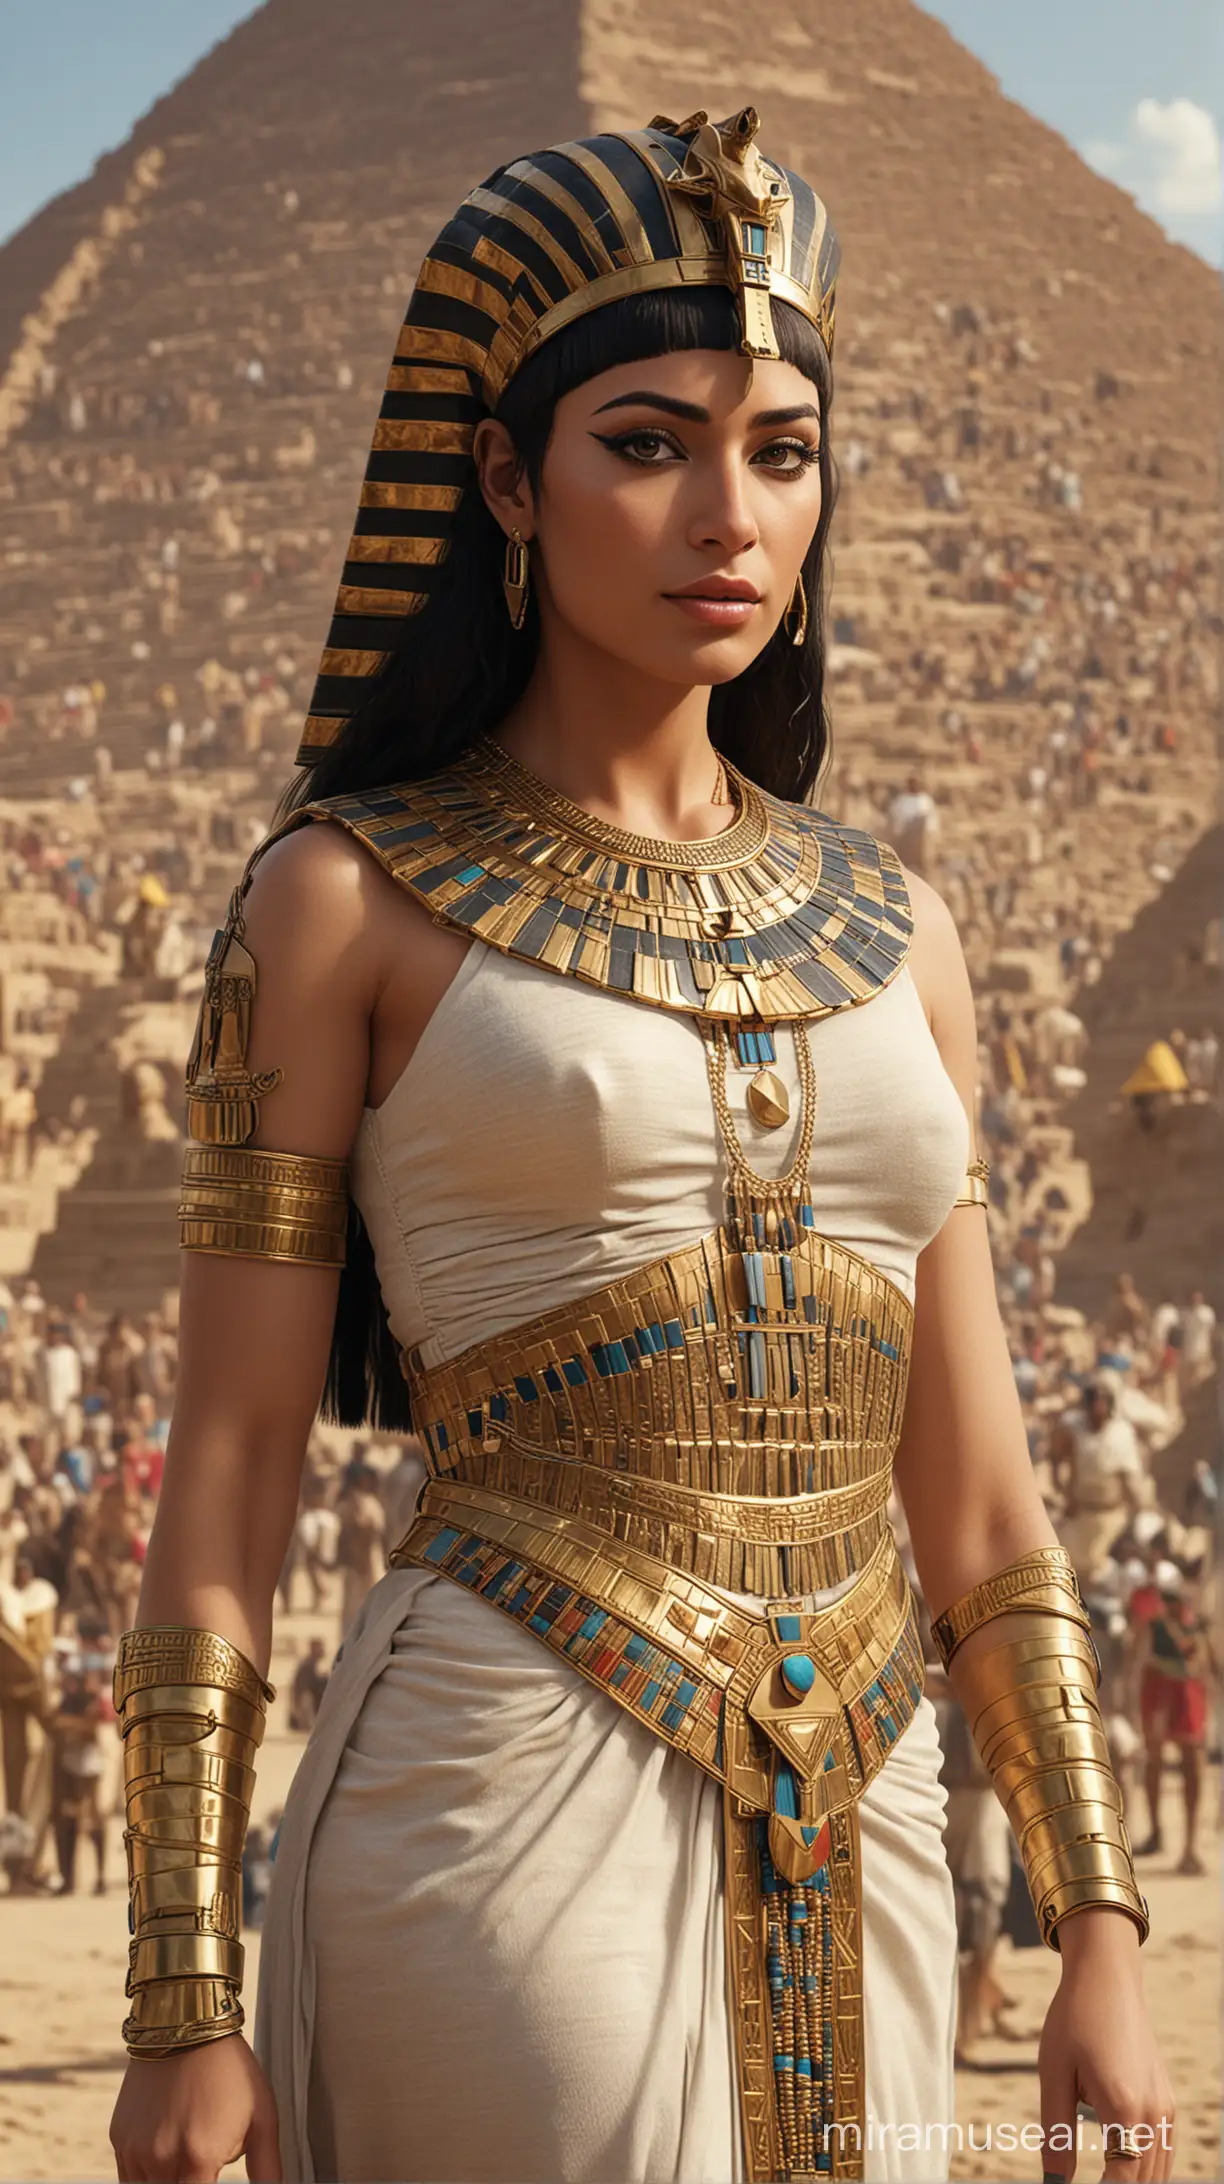 Generate an AI image depicting Cleopatra, the illustrious Queen of Egypt near the great pyramid with her security and servants around. Hyper realistic.